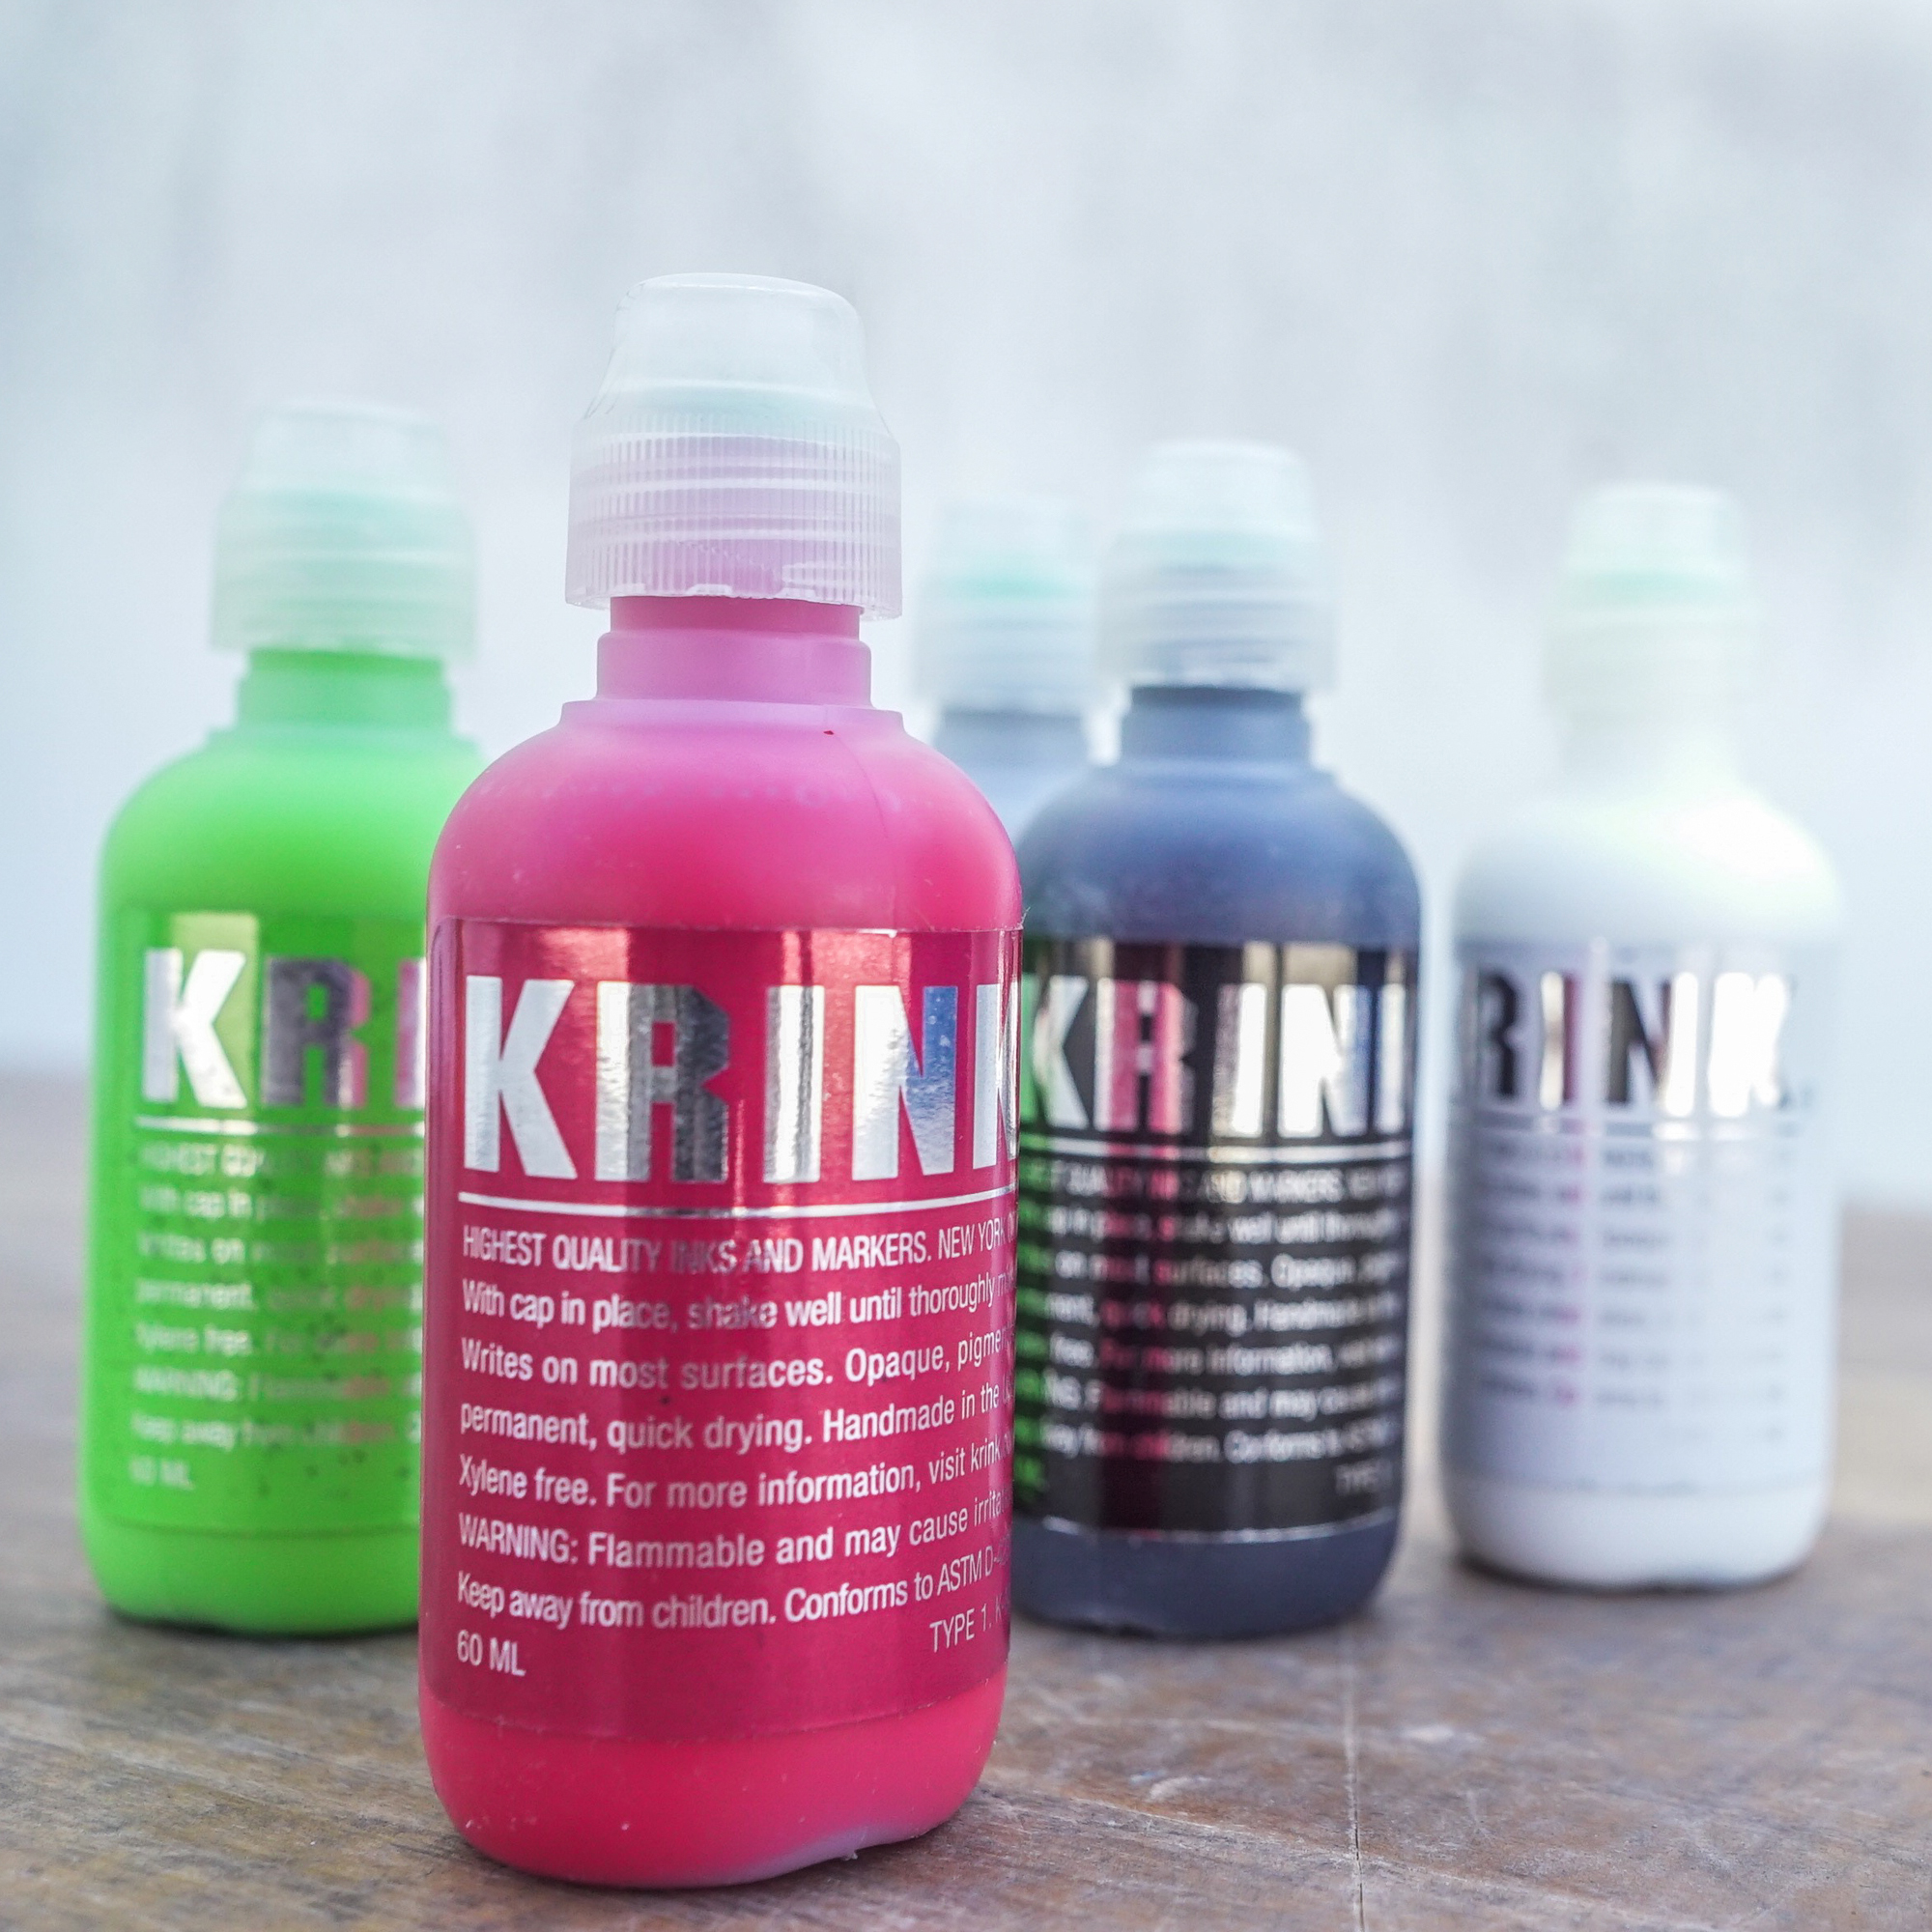 Purchase All Krink markers, mops, drippers and inks on sprayplanet.com